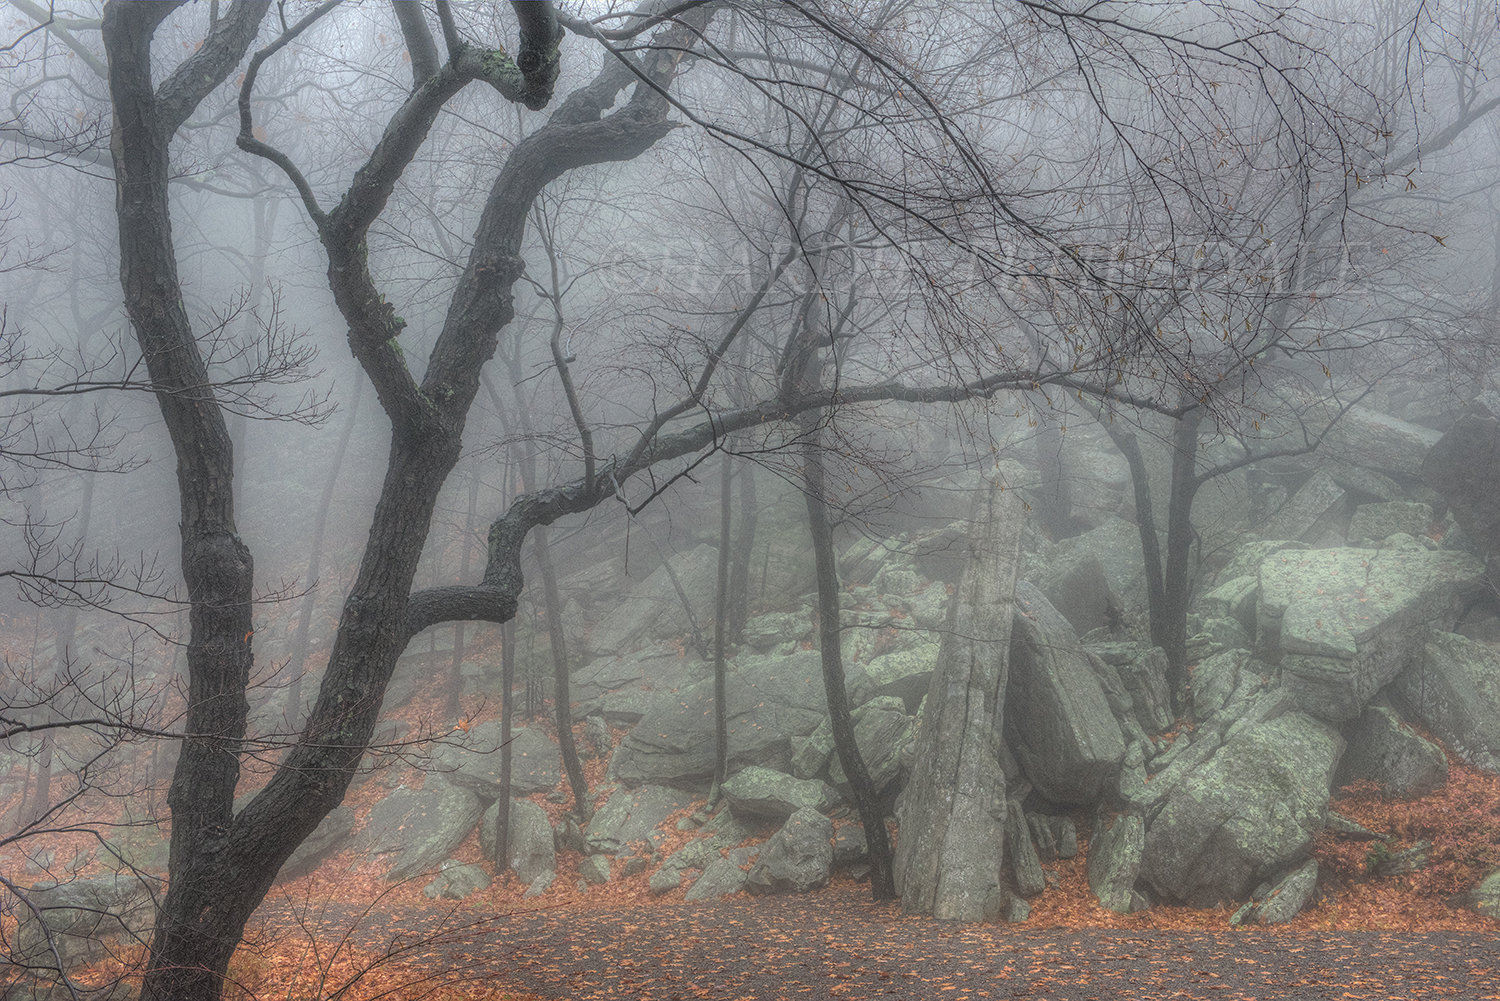 Gks#895 "Trapps Talus, Tree, and Mist, Mohonk Preserve, NY"